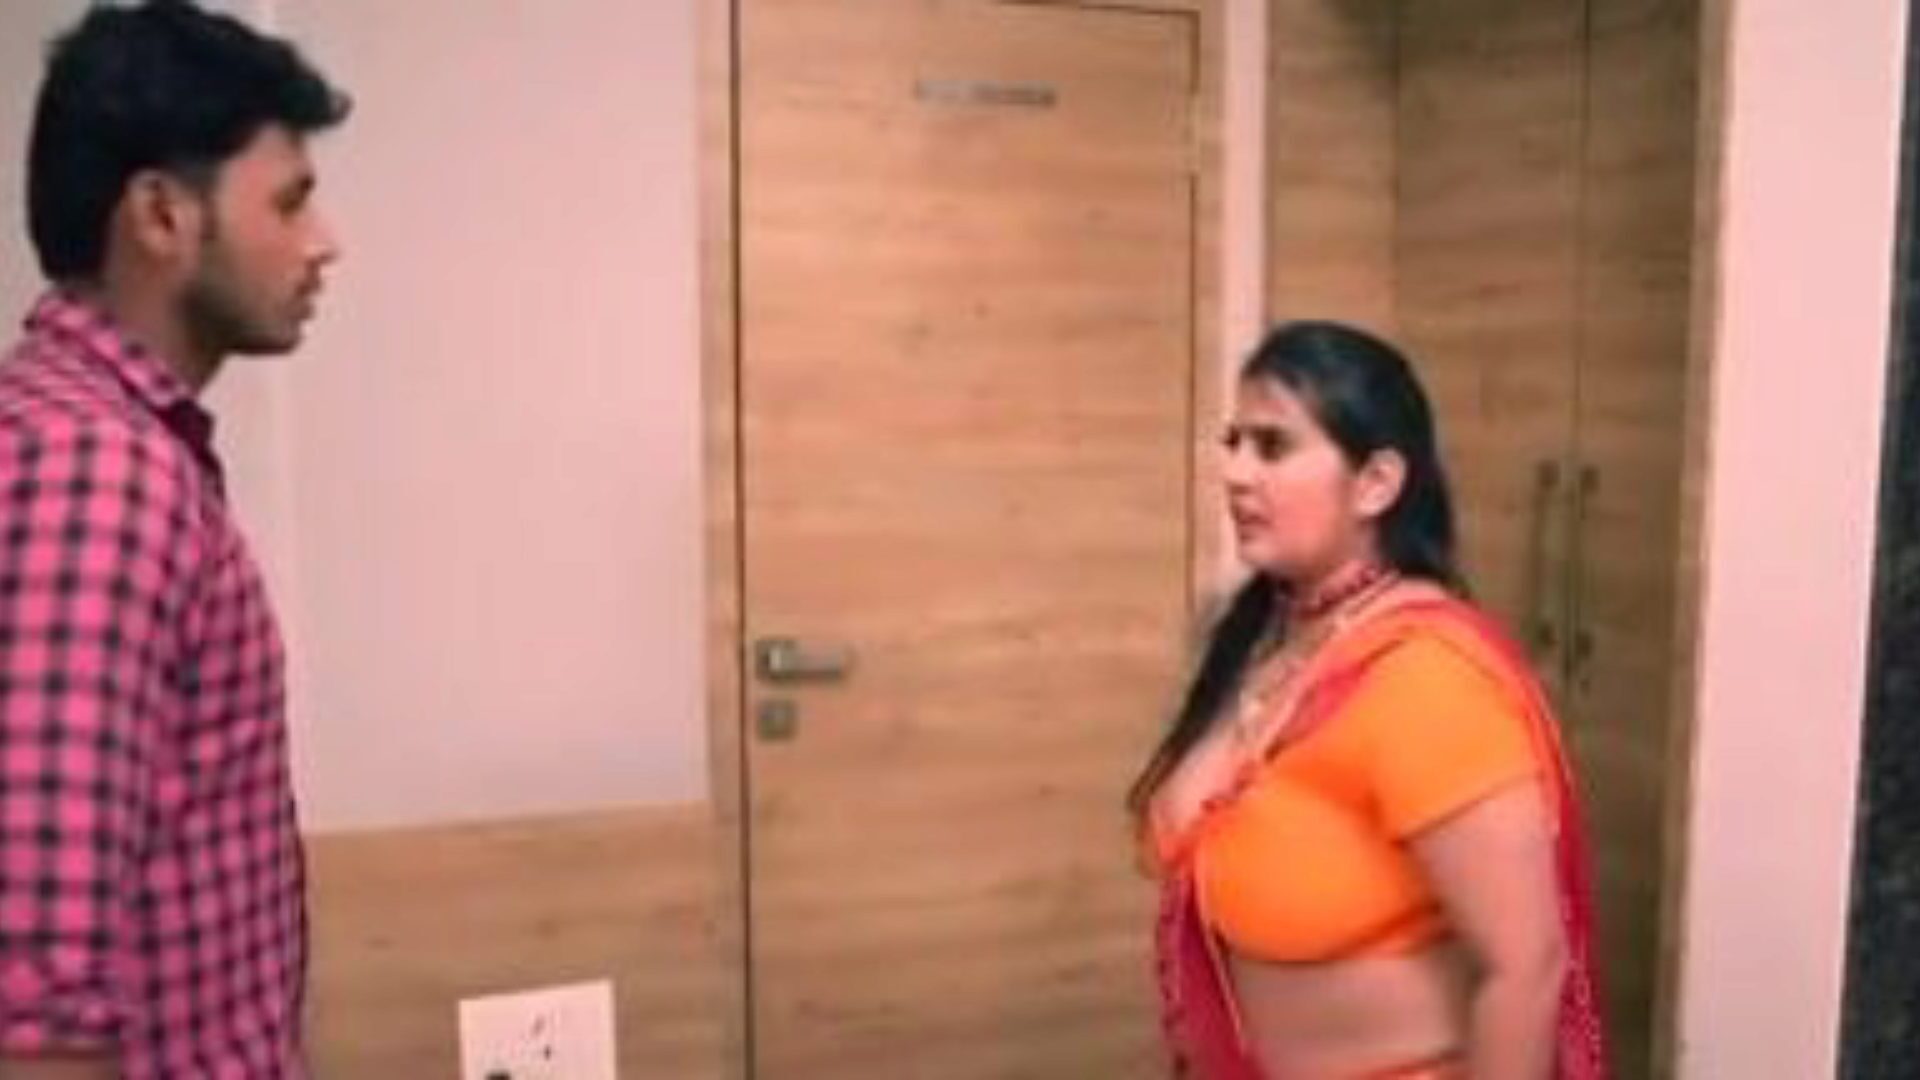 kanchan aunty ep5: free aunty xxx porn video 03 - xhamster watch kanchan aunty ep5 tube scene de dragoste film for-for-all on xhamster, with the superior bevy of bangladeshi aunty xxx & aunty mobile porno vignettes